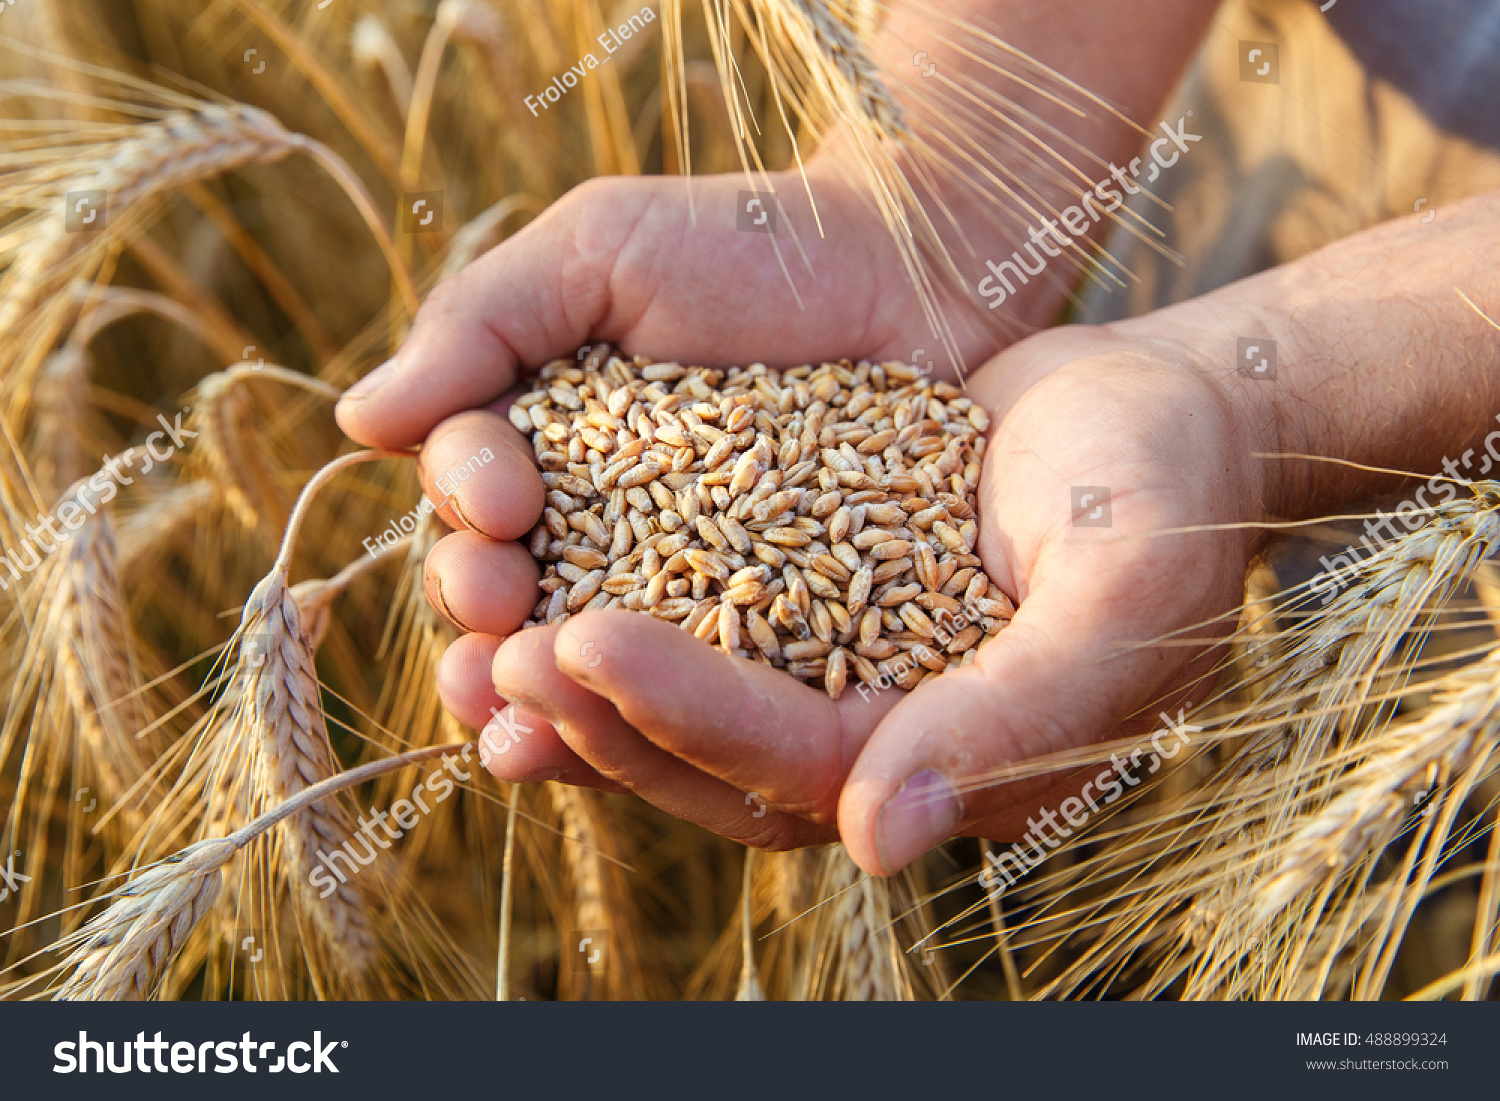 The hands of a farmer close-up holding a handful of wheat grains in a wheat field. #488899324